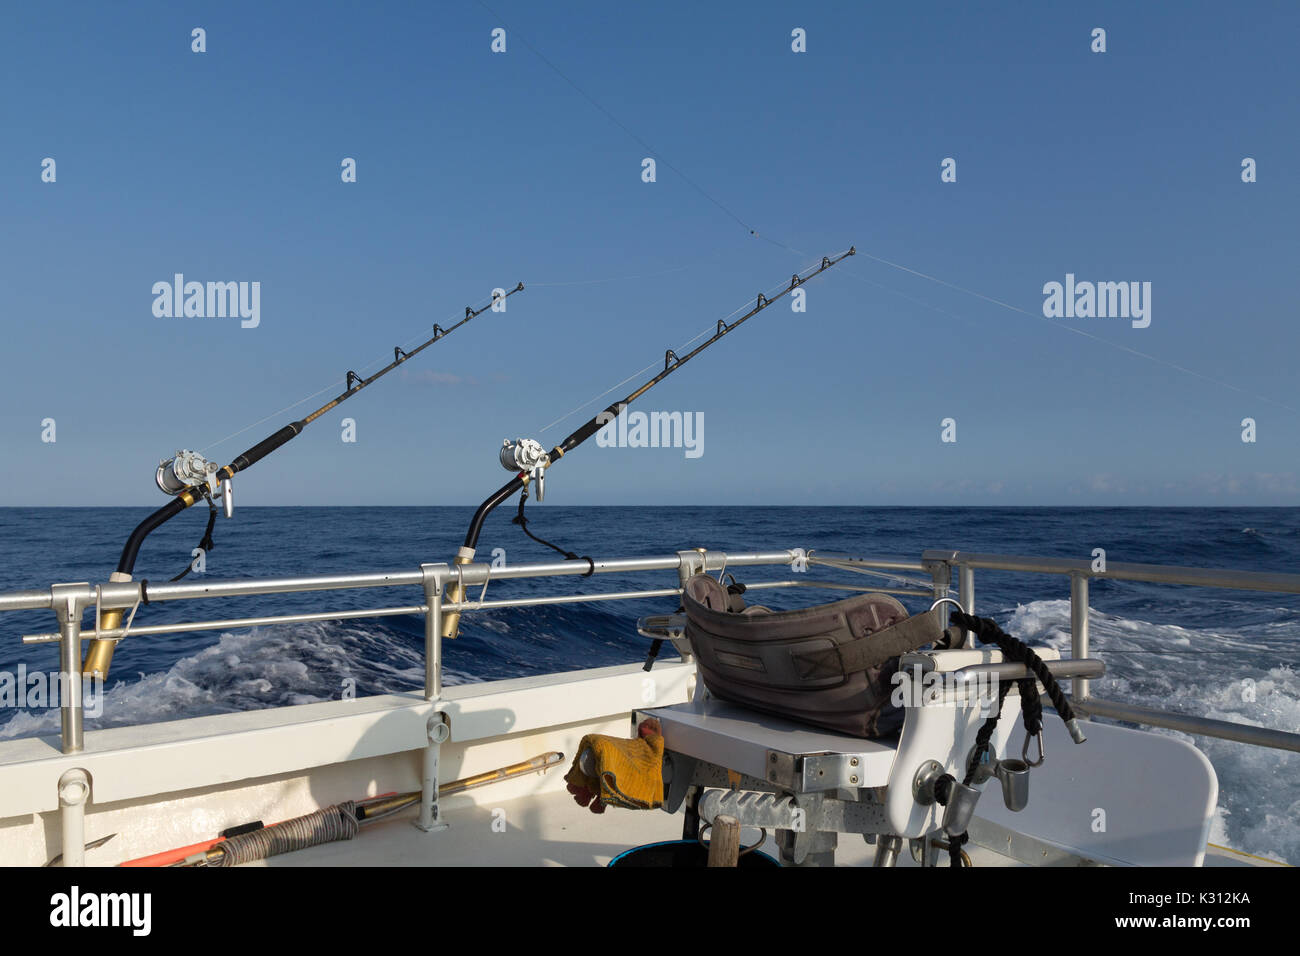 Fighting chair with fishing gear on offshore deep sea fishing boat